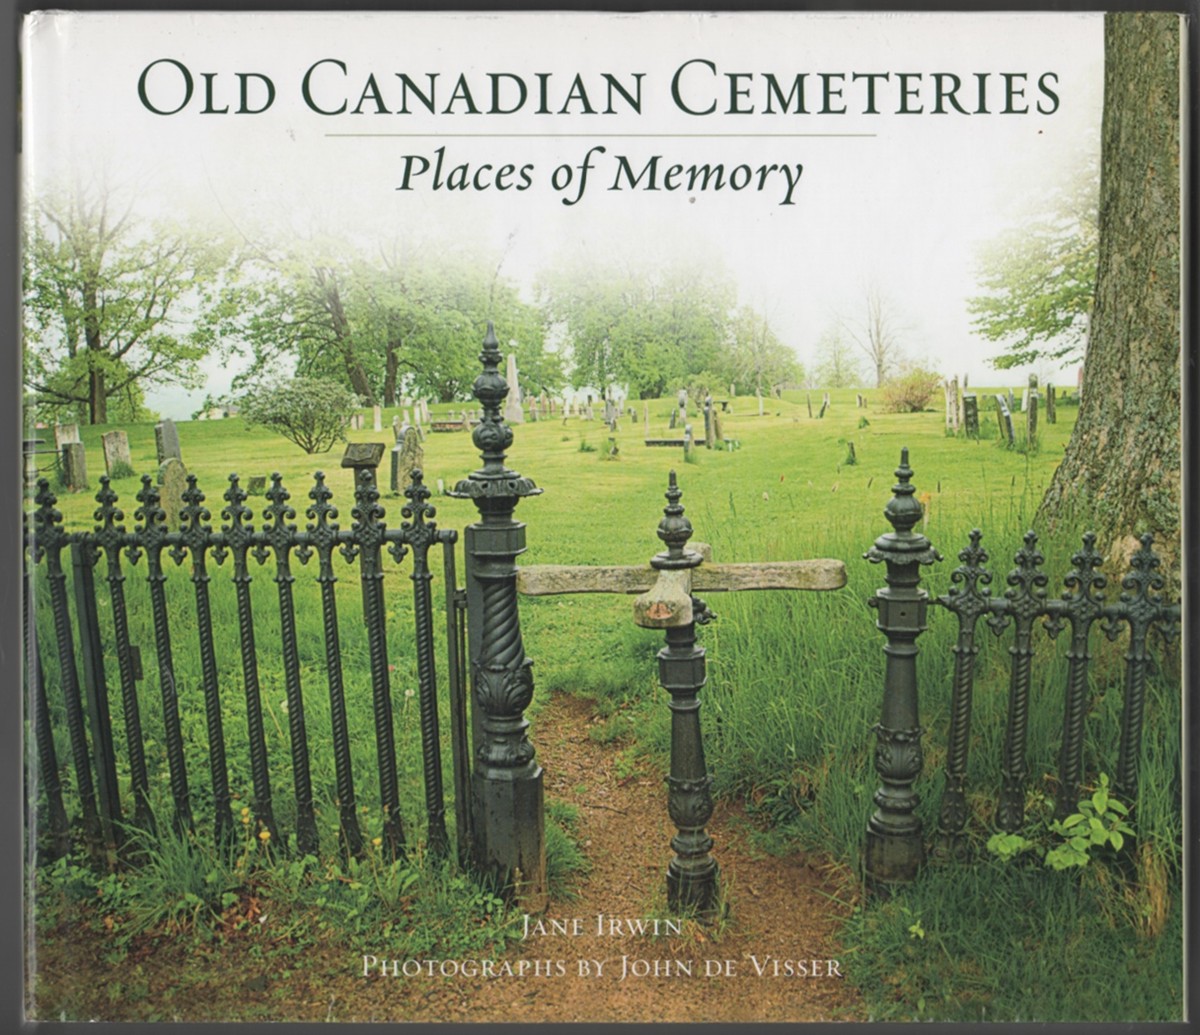 IRWIN, JANE - Old Canadian Cemeteries Places of Memory